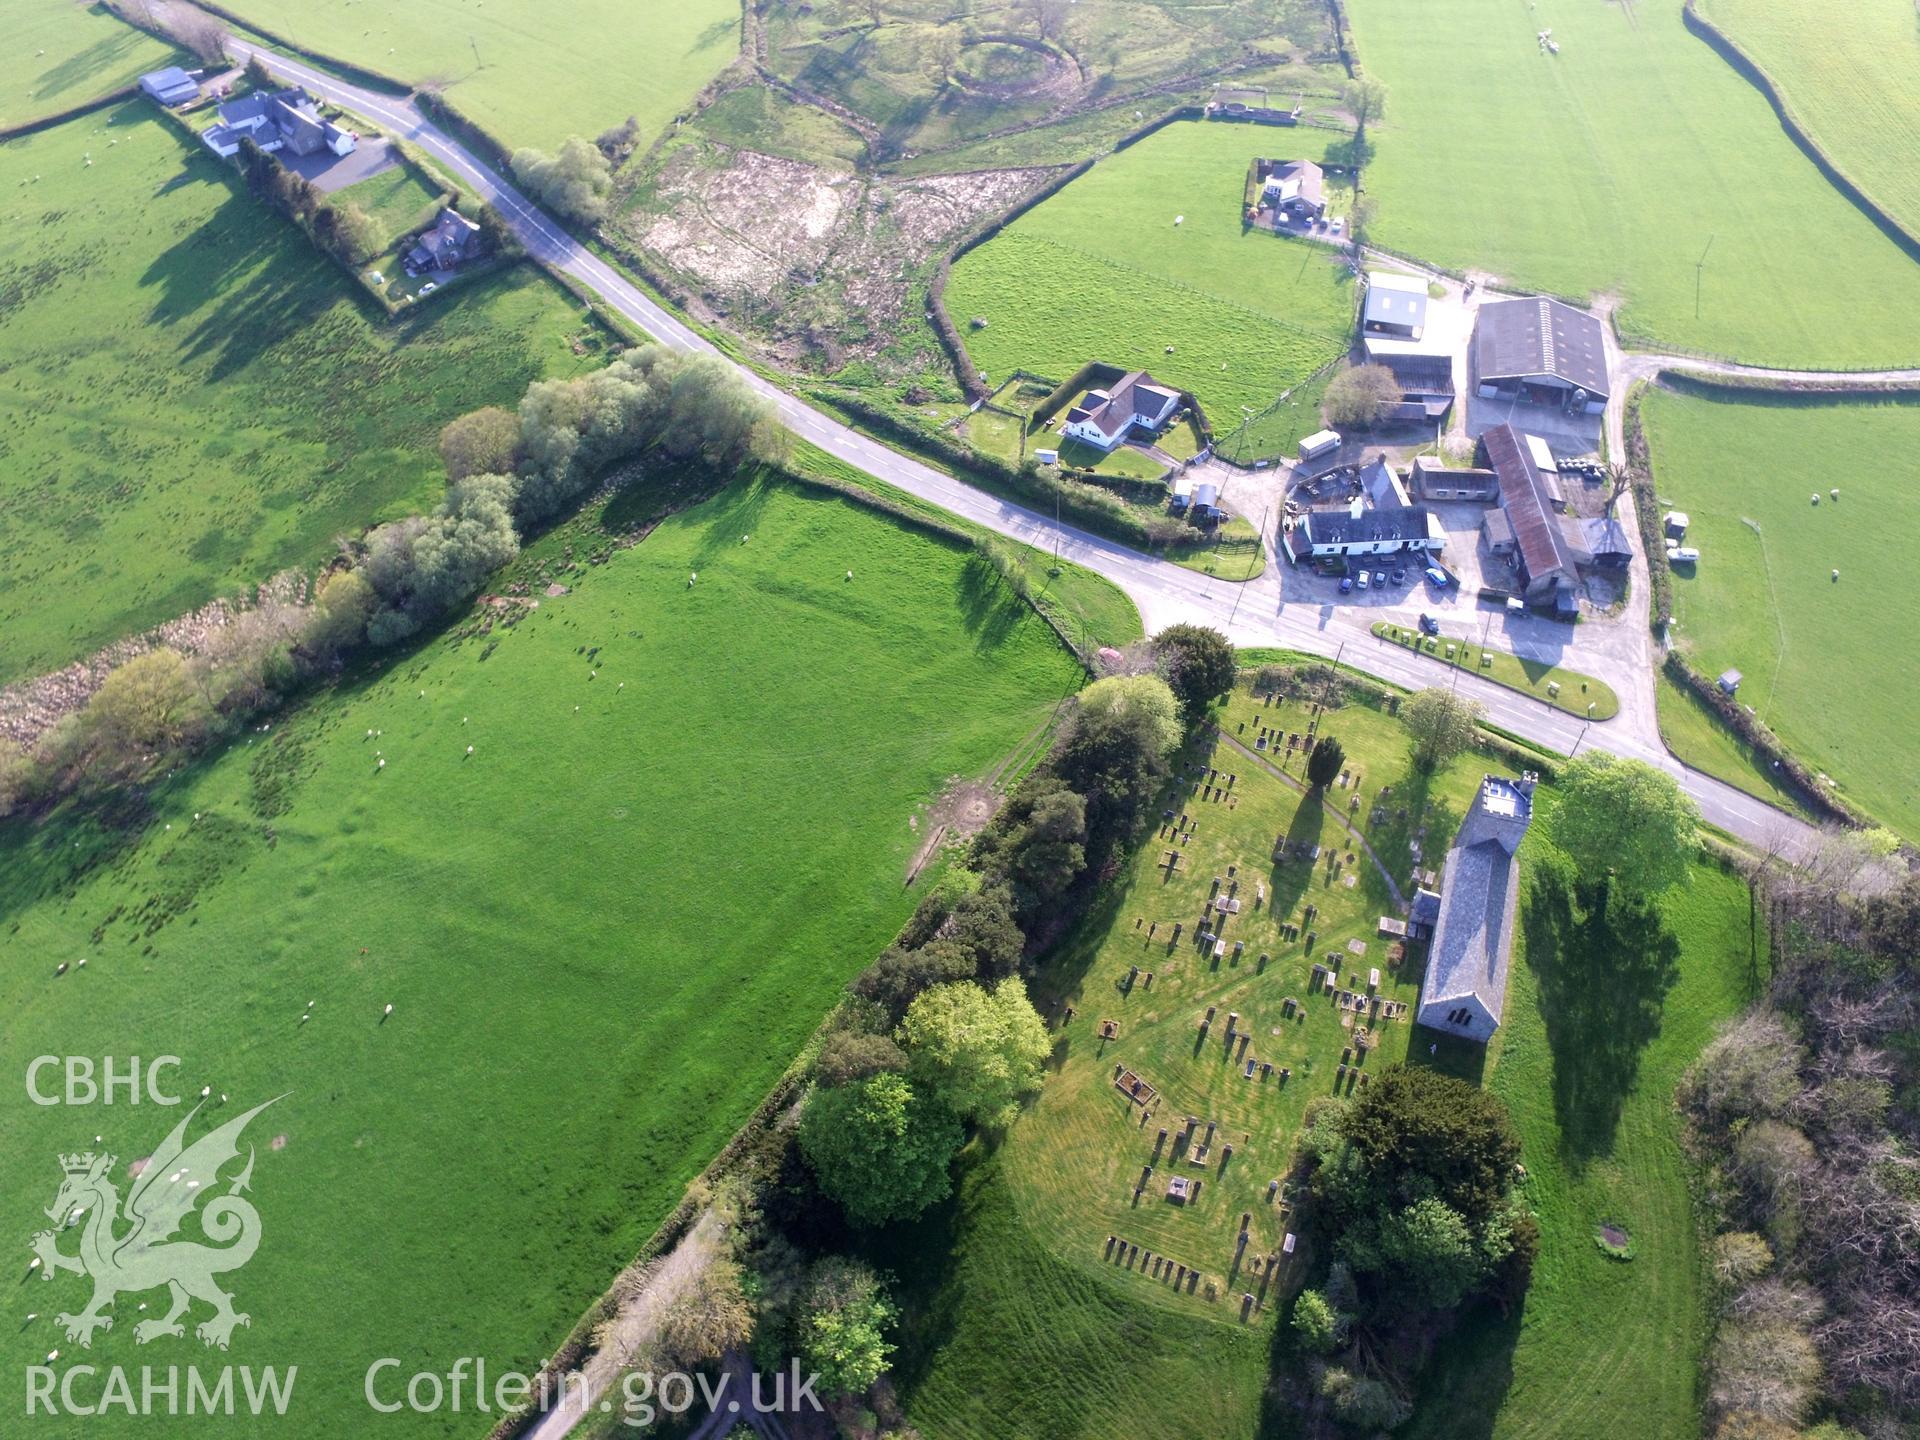 Colour photo showing an aerial view of the village of Llanafanfawr, taken by Paul R. Davis, 7th May 2018.